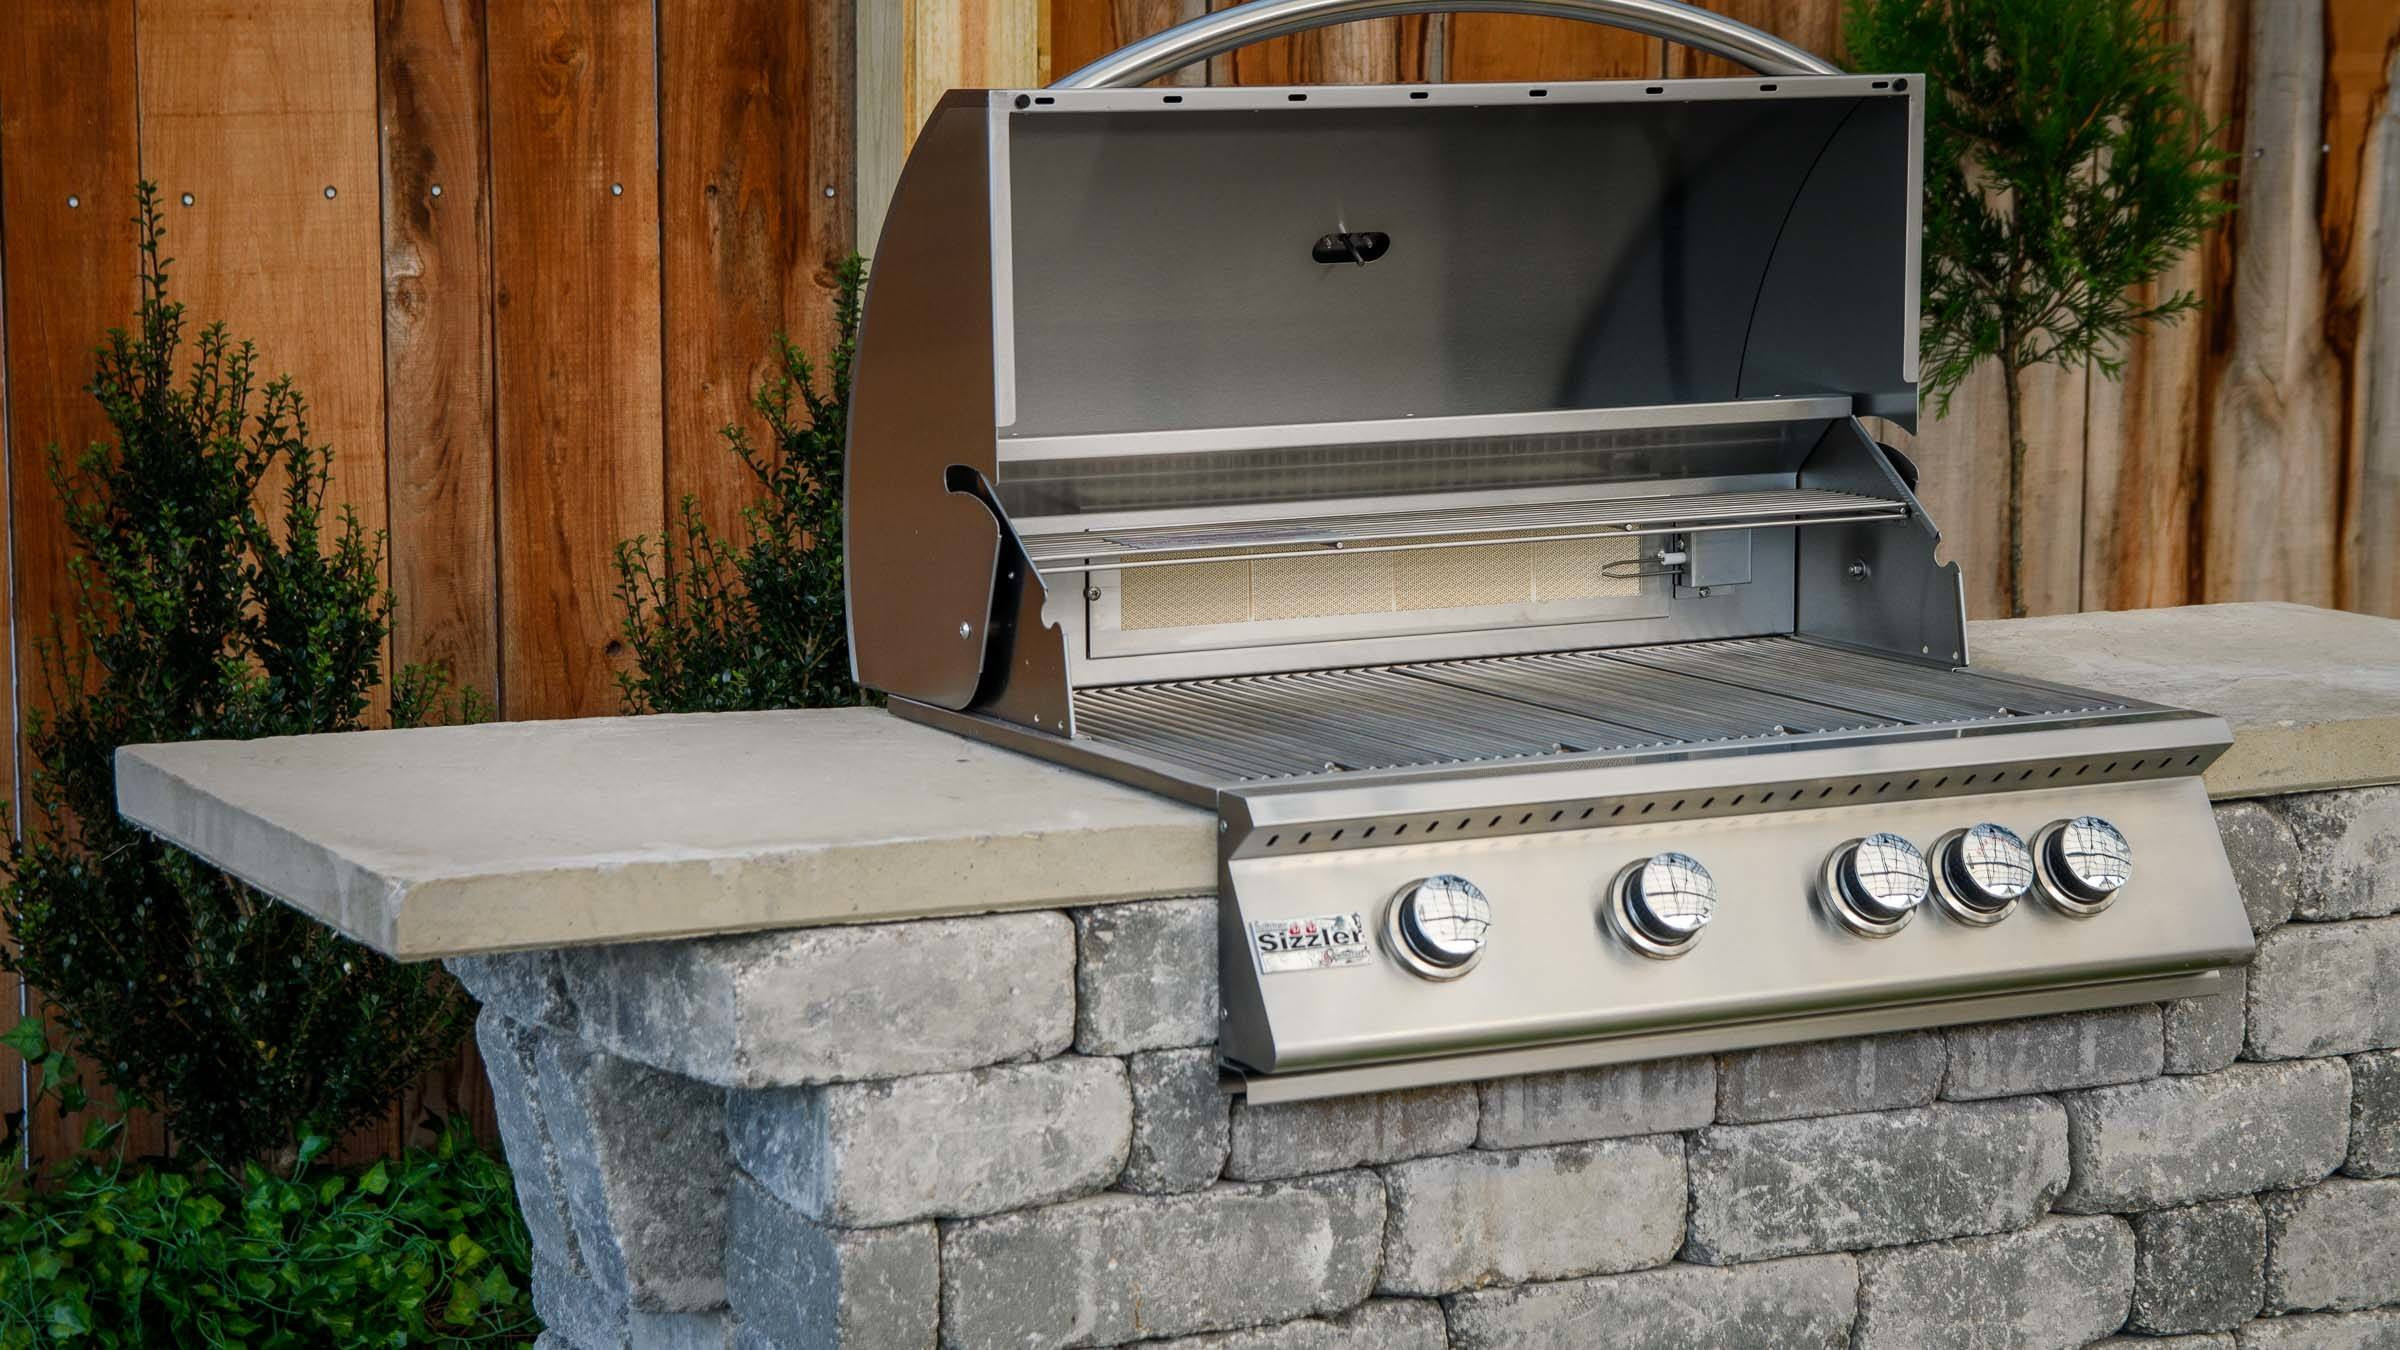 DIY Outdoor Bbq Island
 Willard Grill Island Jealousy inducing grills without